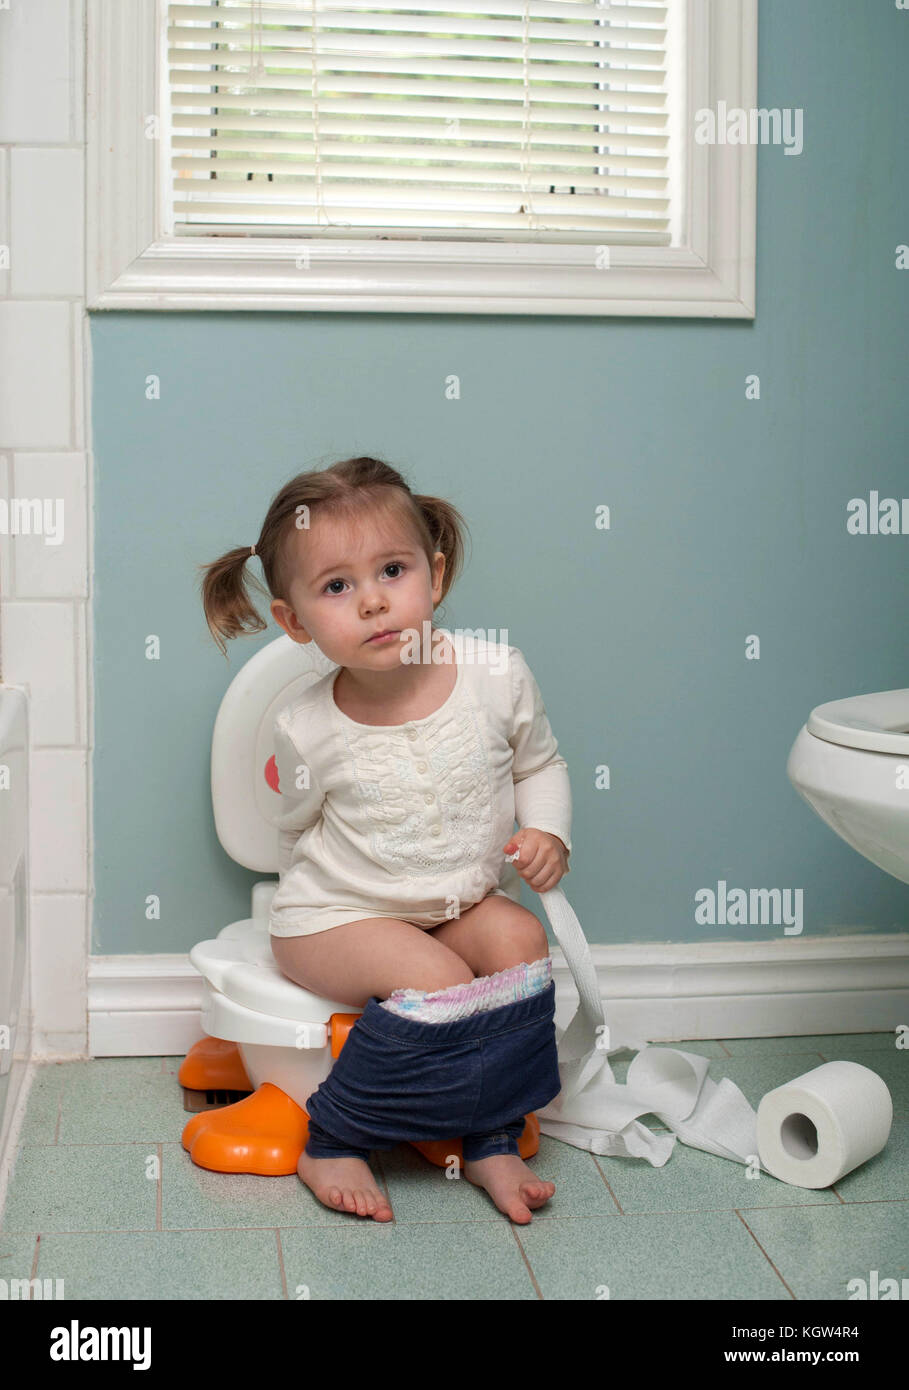 Toddler girl potty training holding toilet paper in bathroom Stock Photo -  Alamy